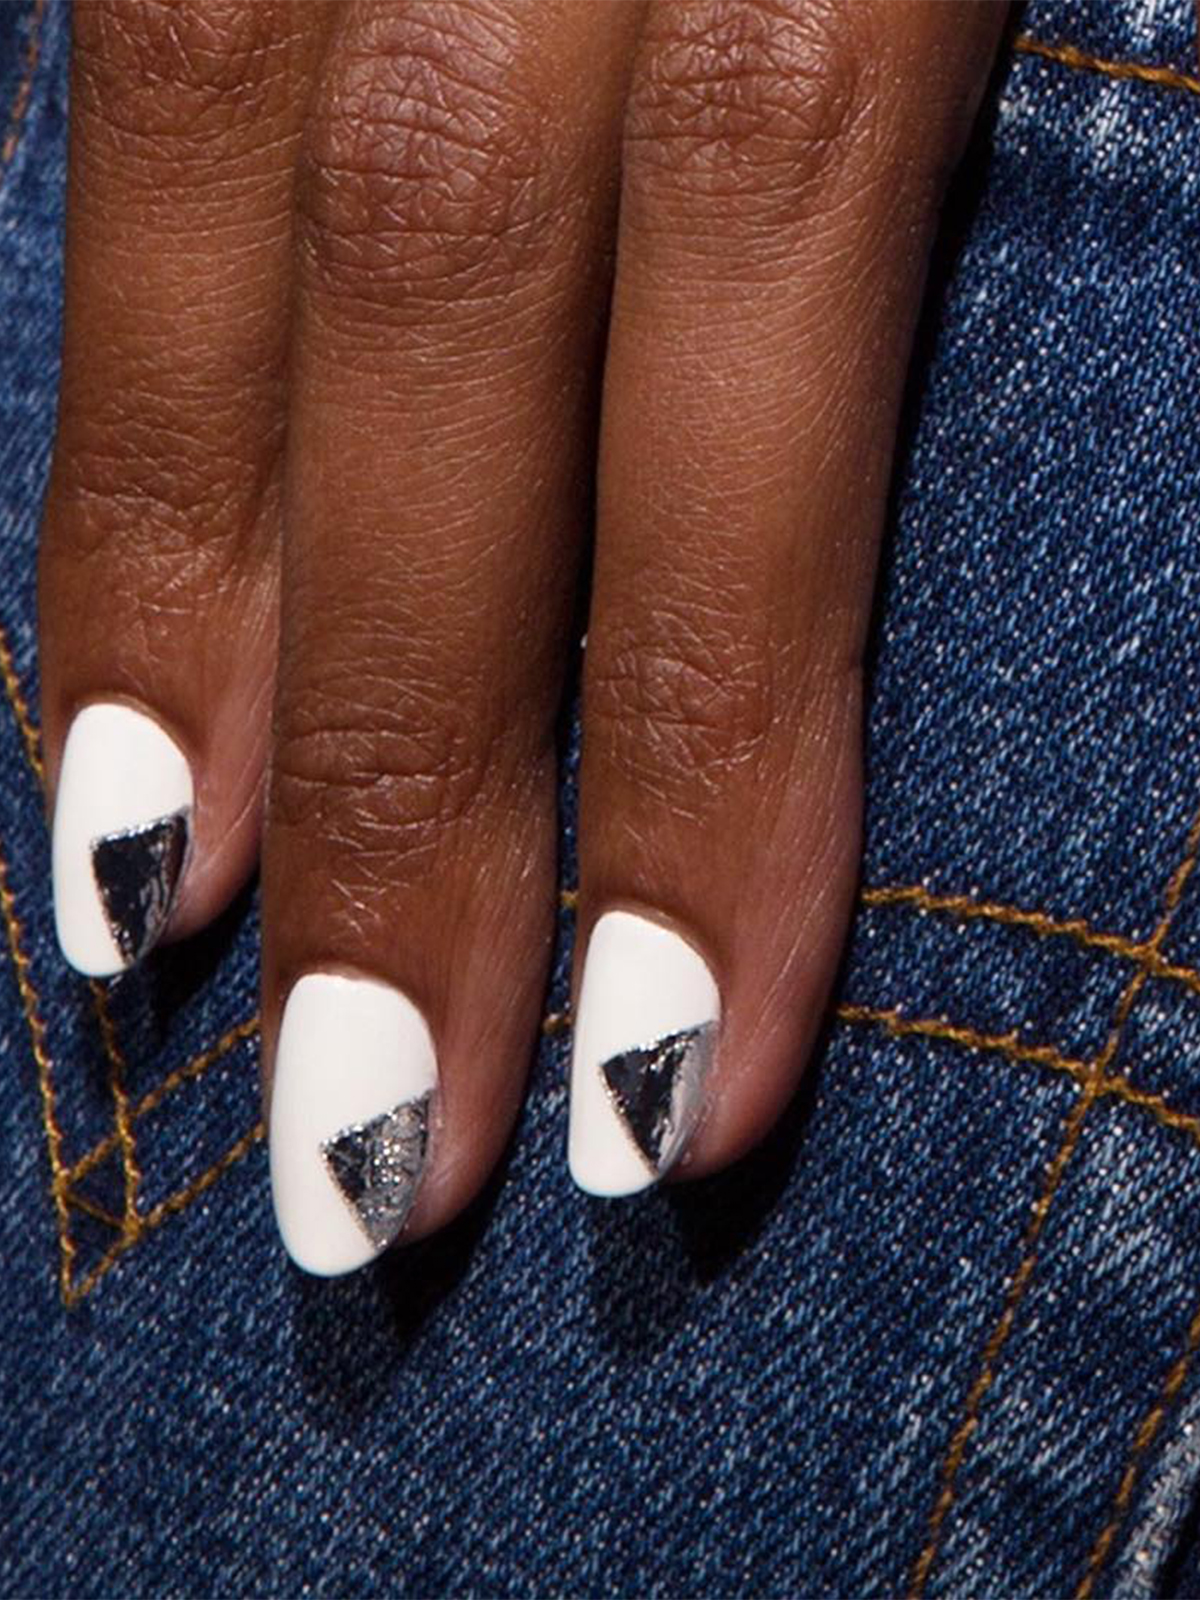 The 16 Best White and Silver Nails We've Seen on Instagram | Who What Wear